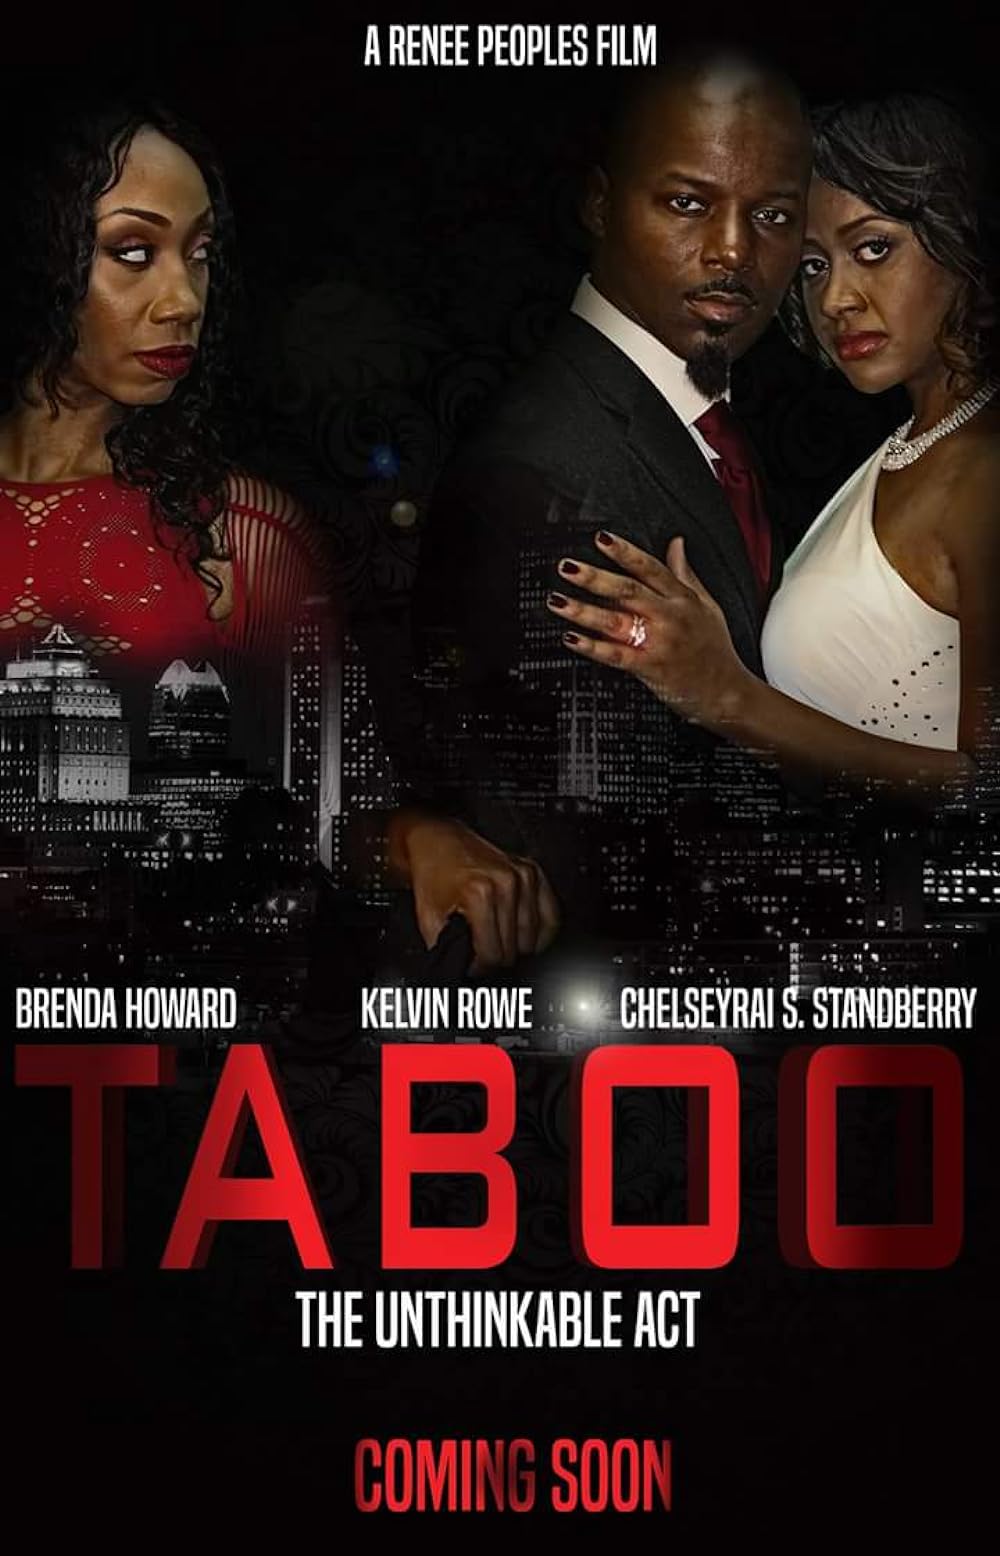 danielle short recommends taboo 2 full movie pic